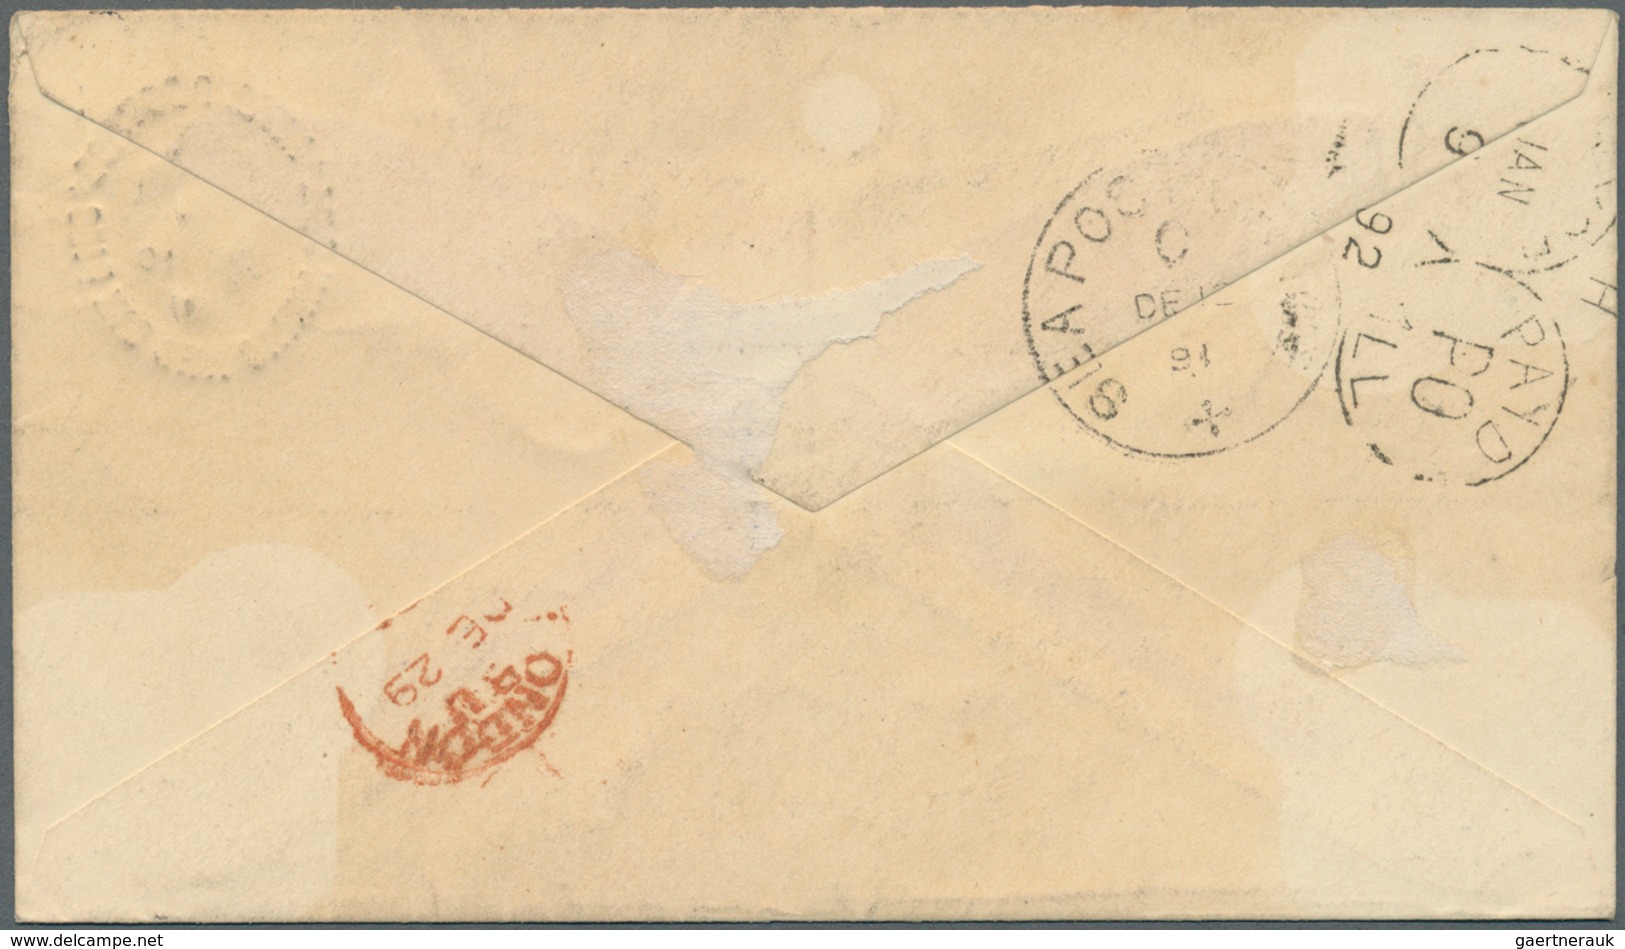 Indien: 1887-1902: Four covers and postal stationery items from India to the U.S.A. and one cover (1